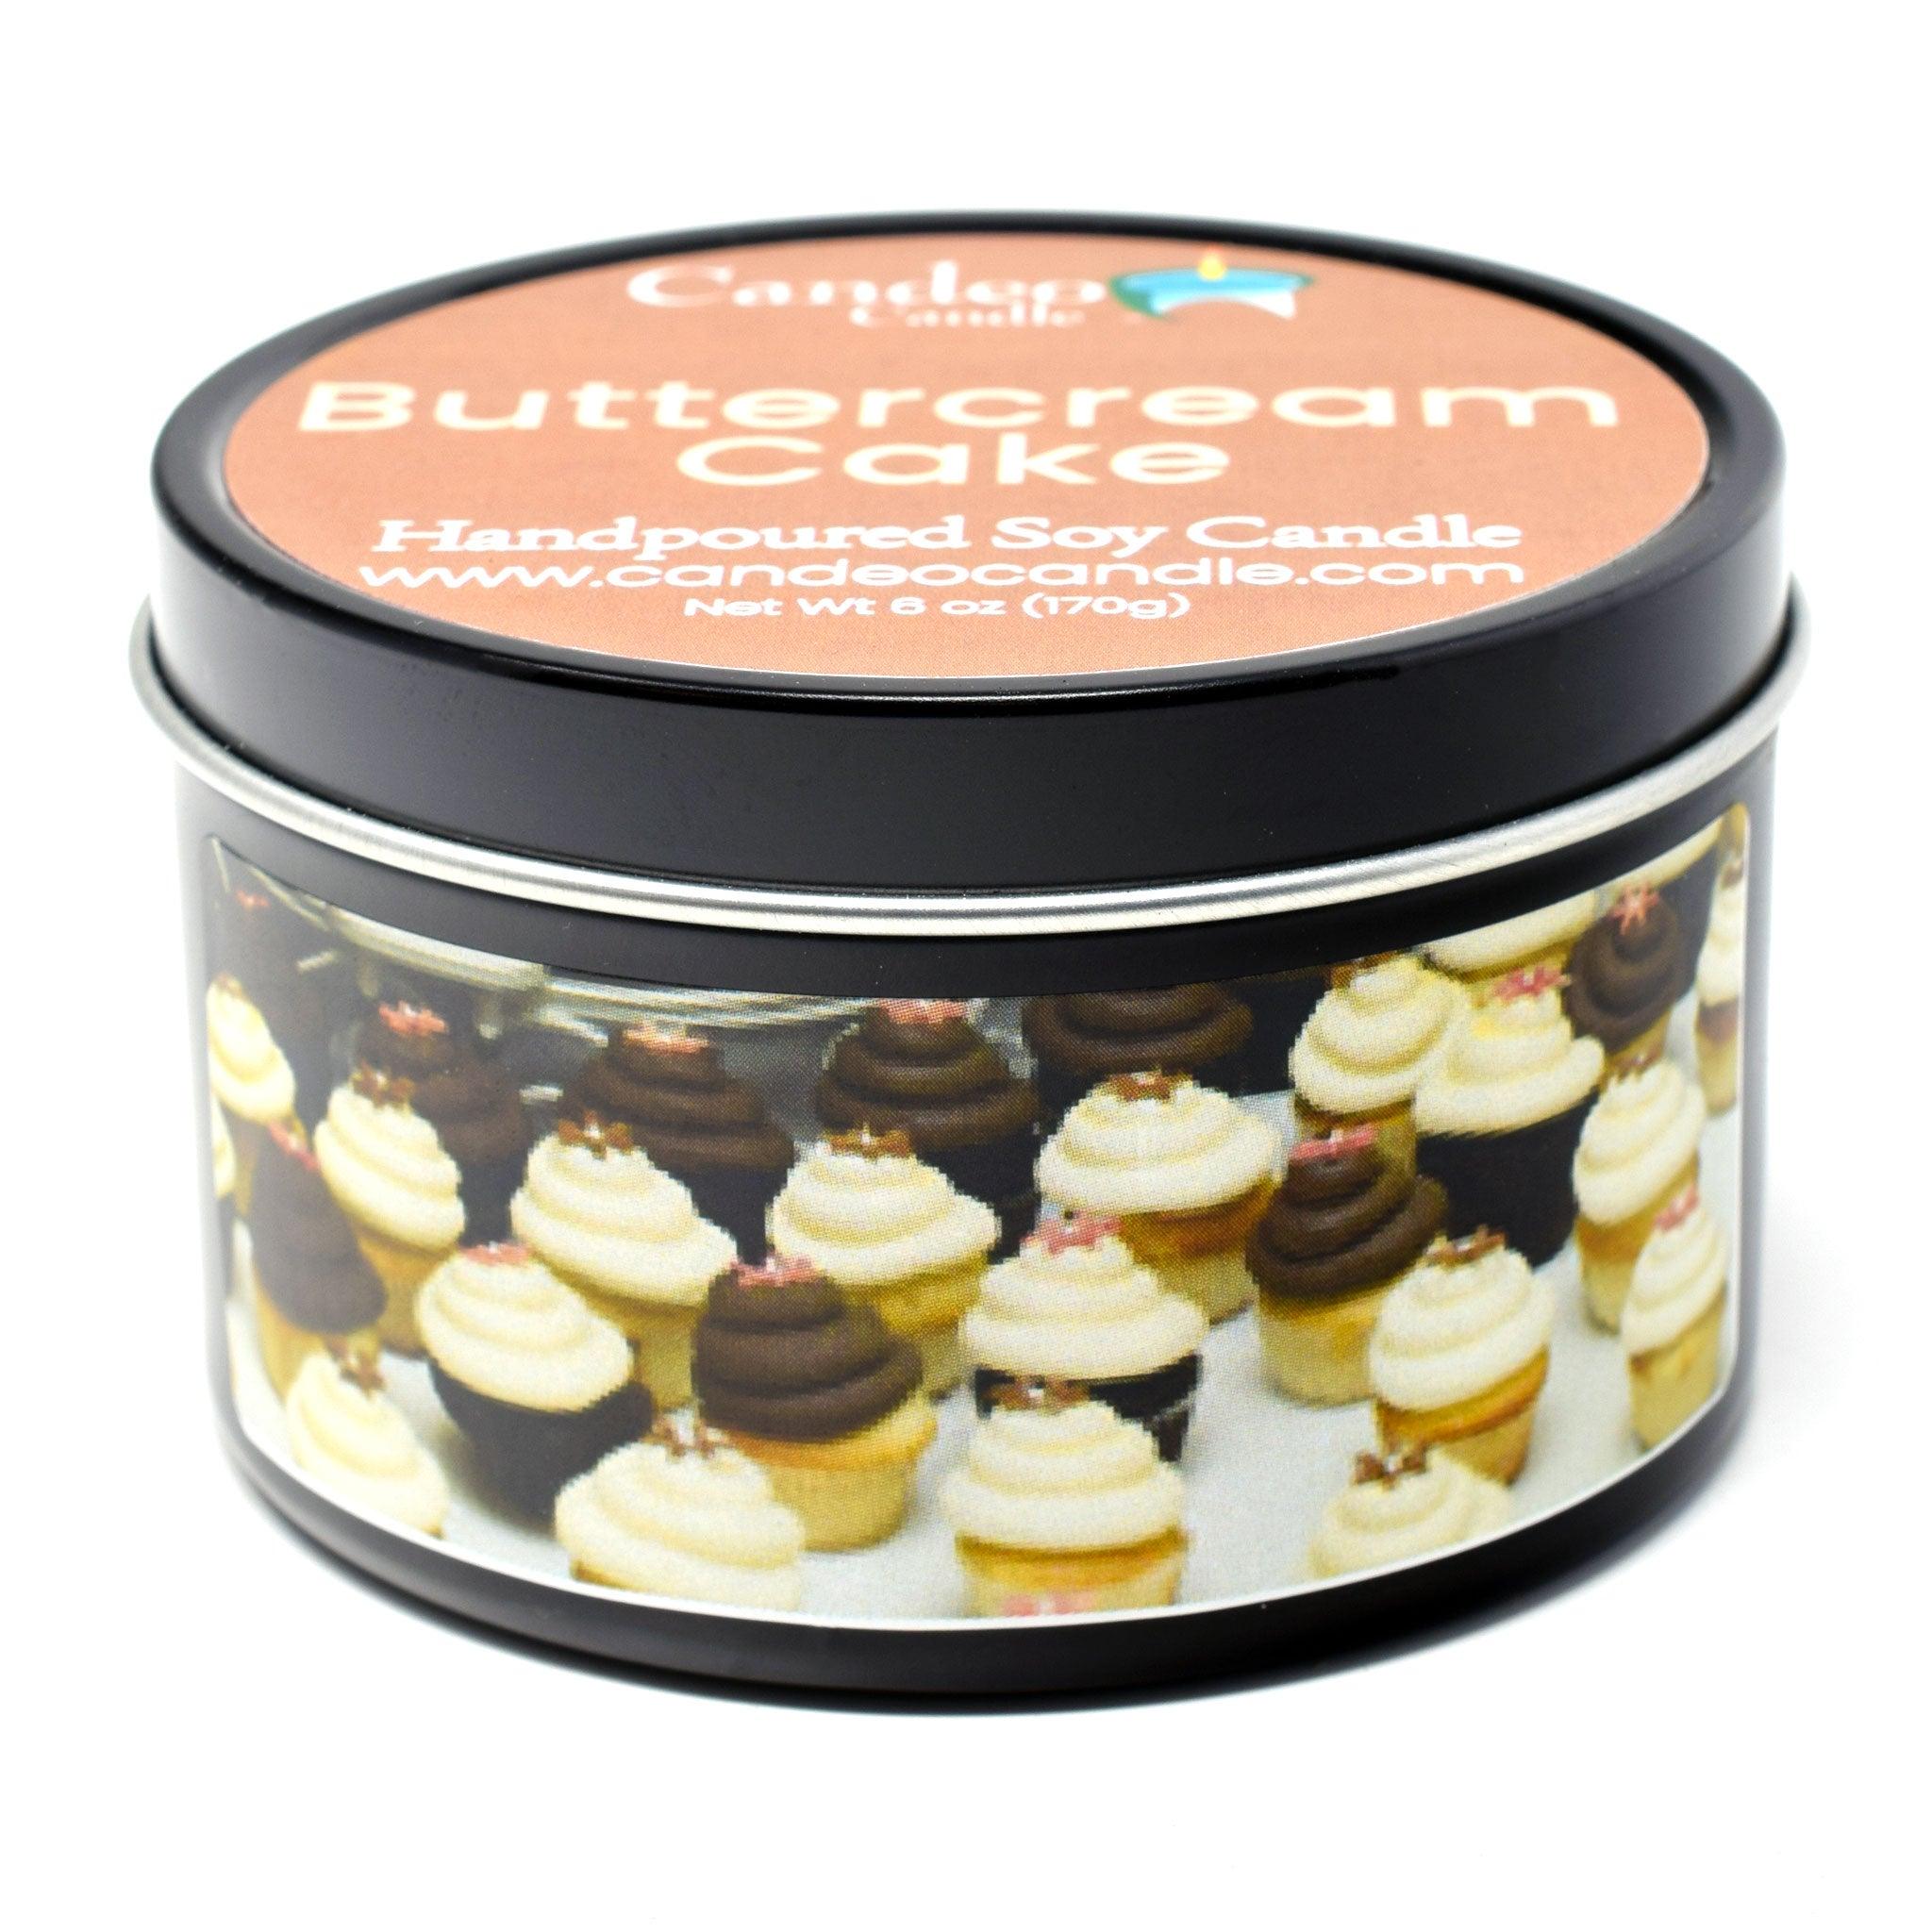 Buttercream Cake, 6oz Soy Candle Tin - Candeo Candle